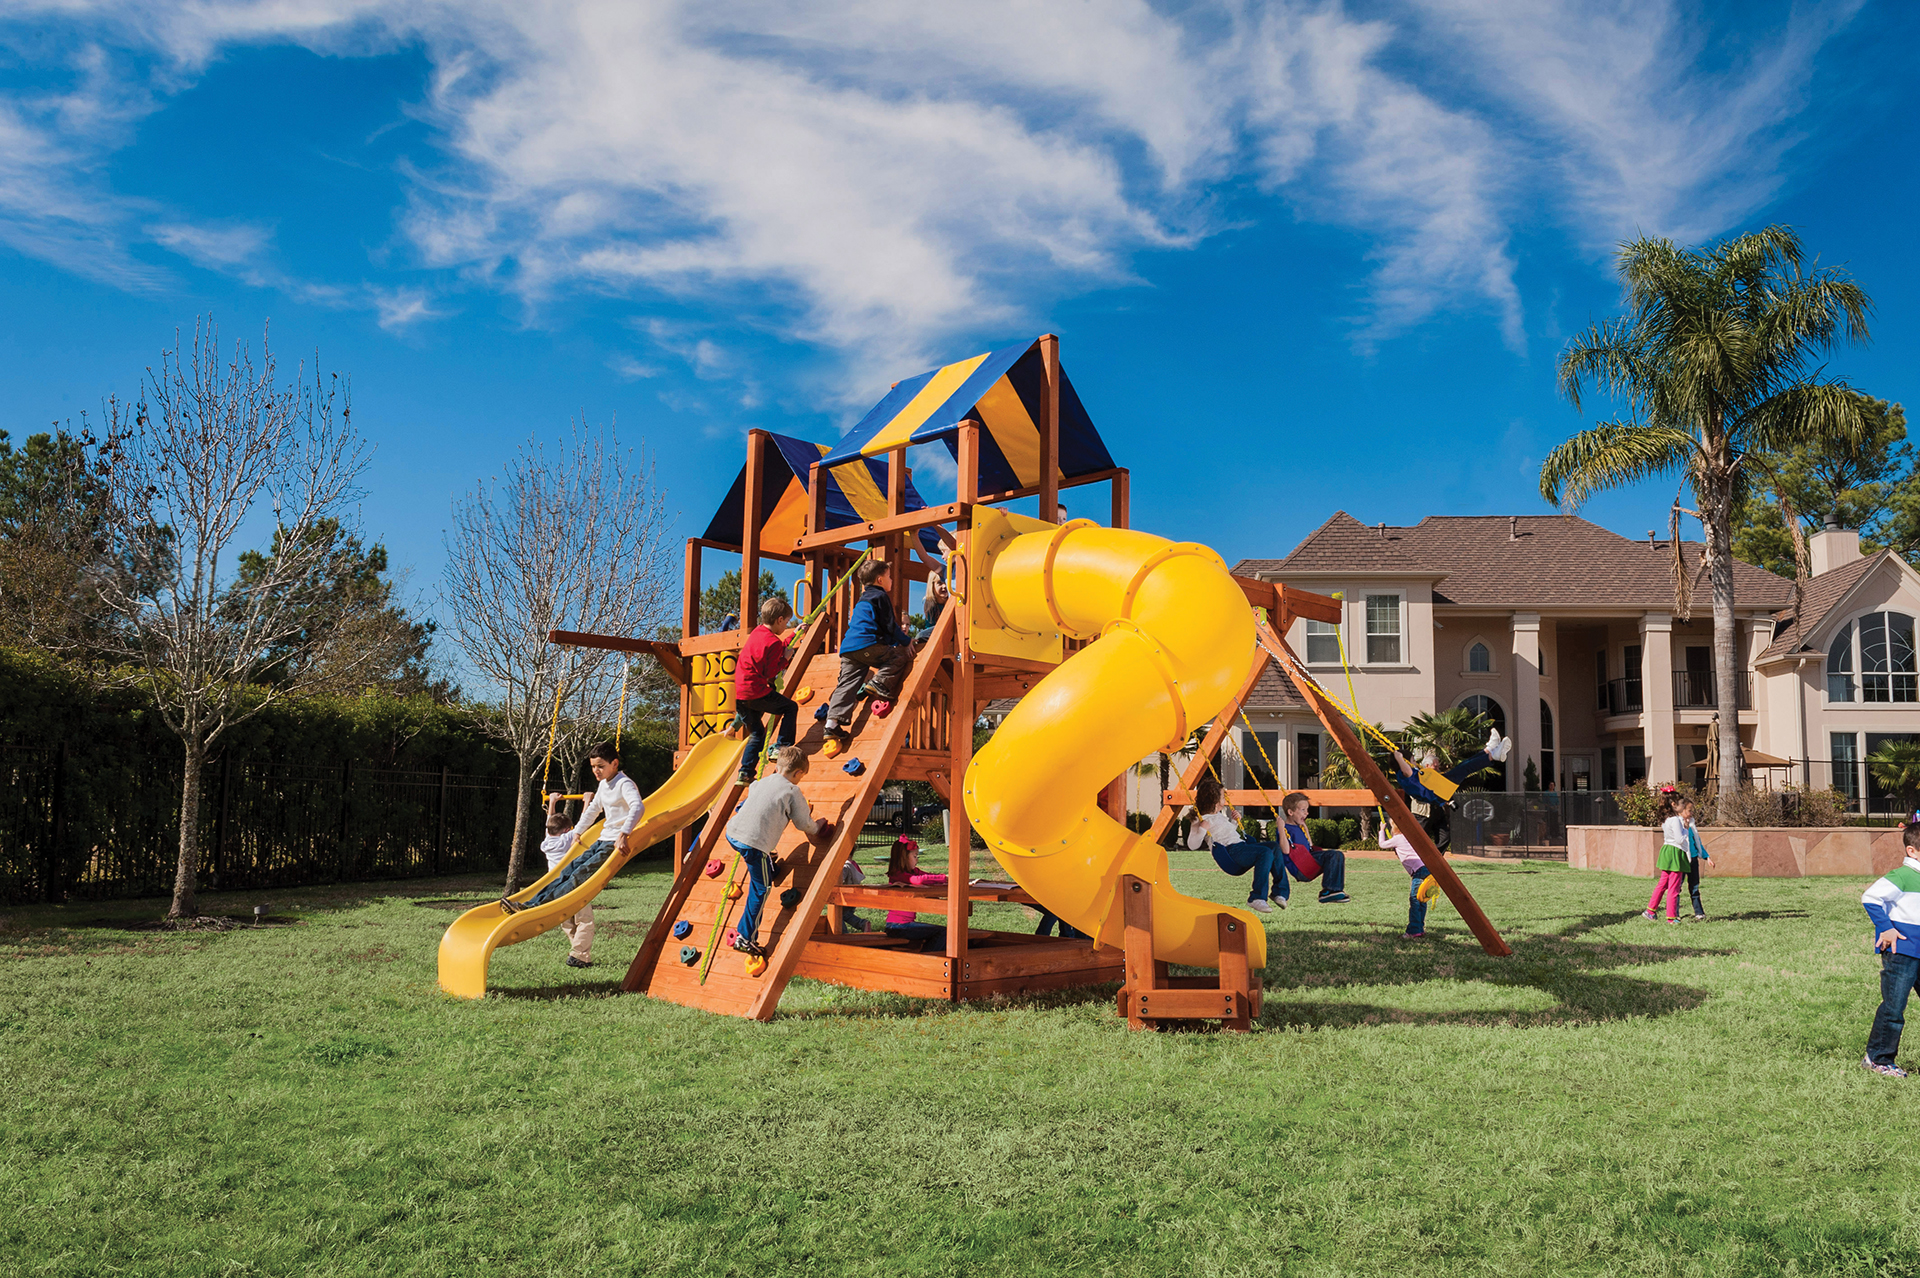 Your kids have big imaginations and big plans. Make sure they fit safely in your yard.